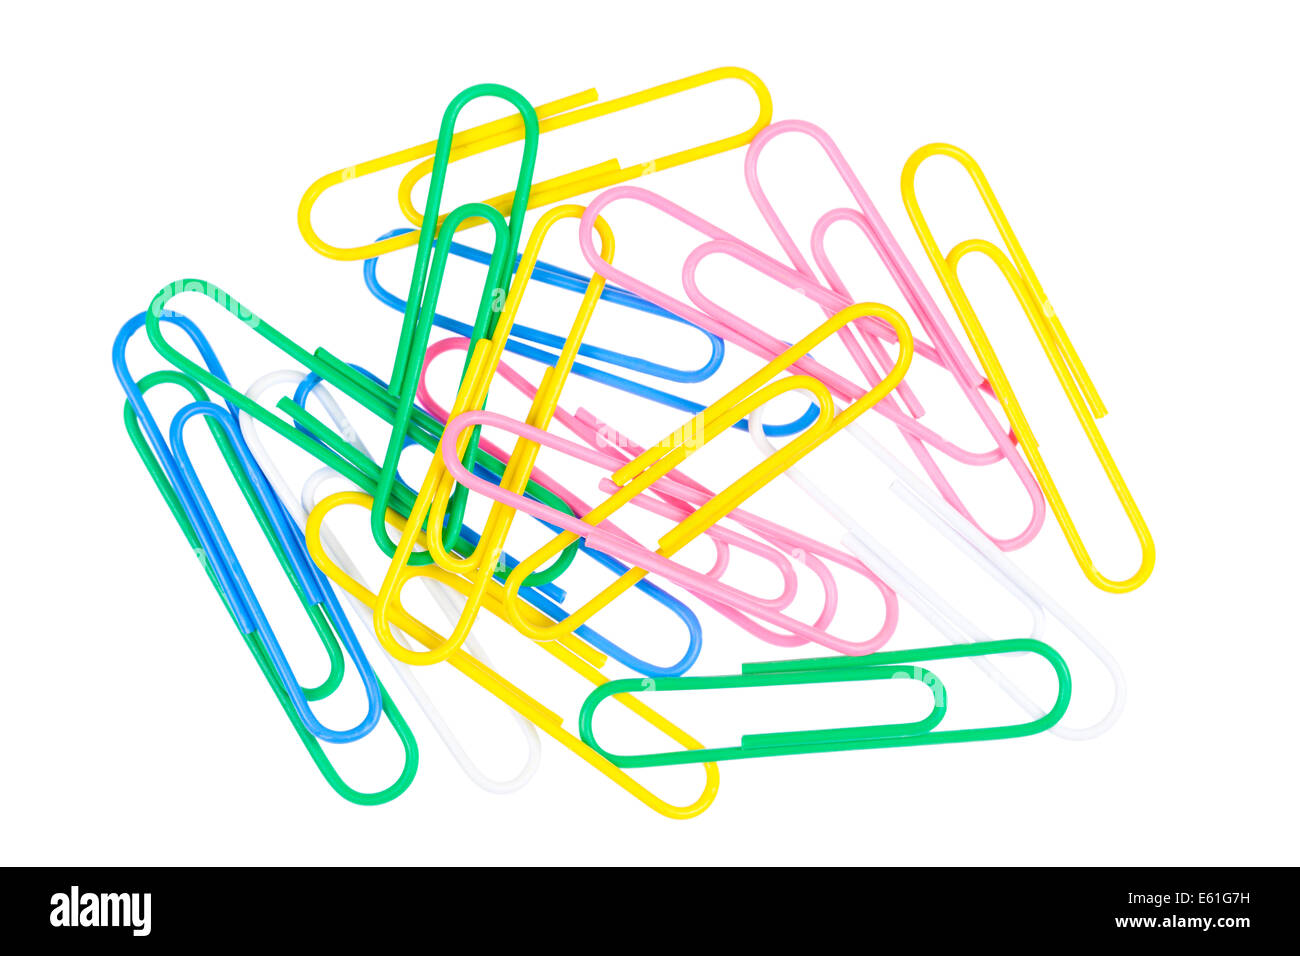 Coloured paper clips on a white background Stock Photo